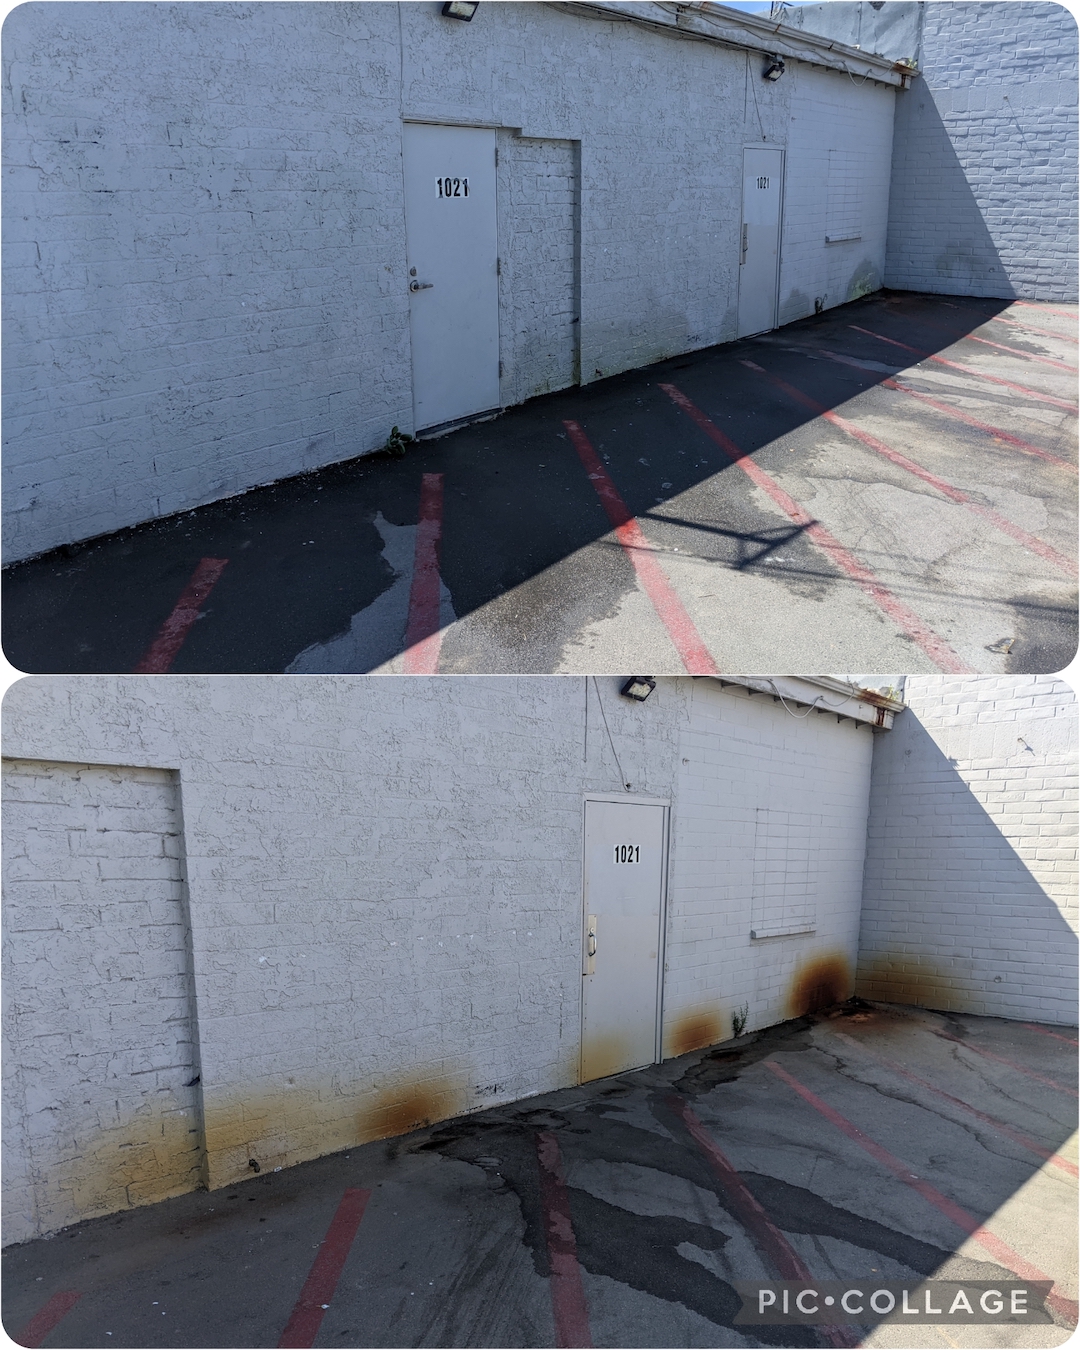 Rust Removal From Bricks And Other Surfaces in Costa Mesa, CA